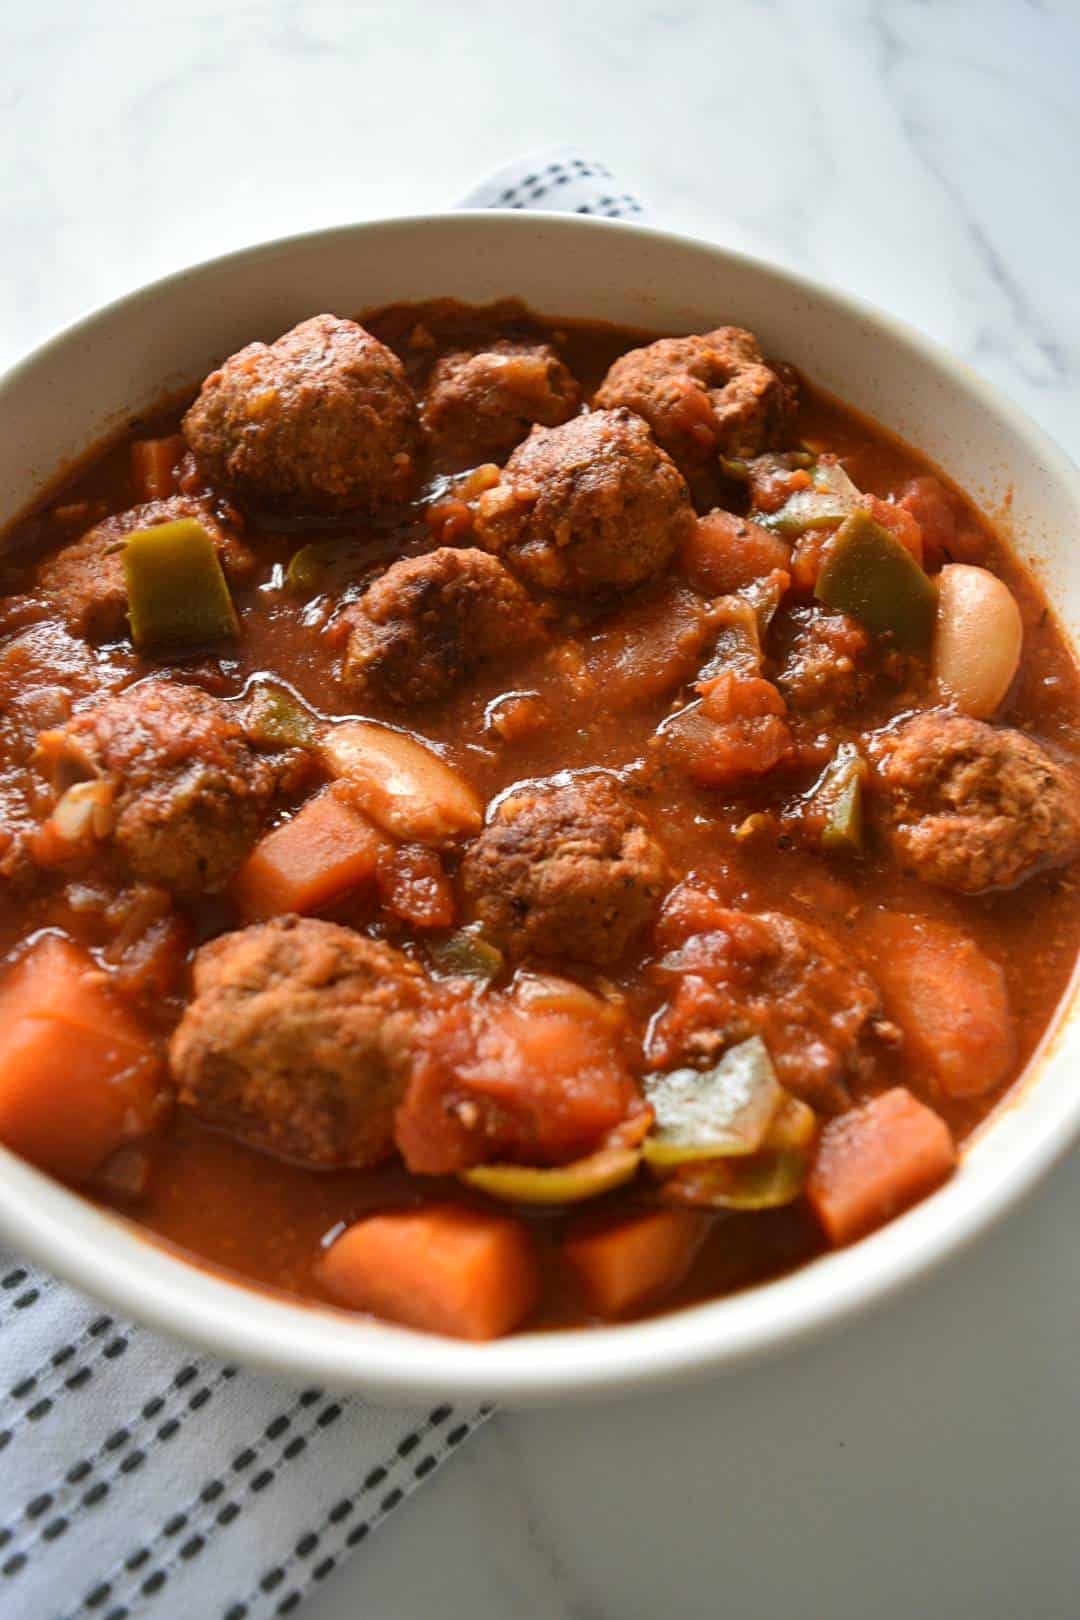 Meatball stew in a bowl.